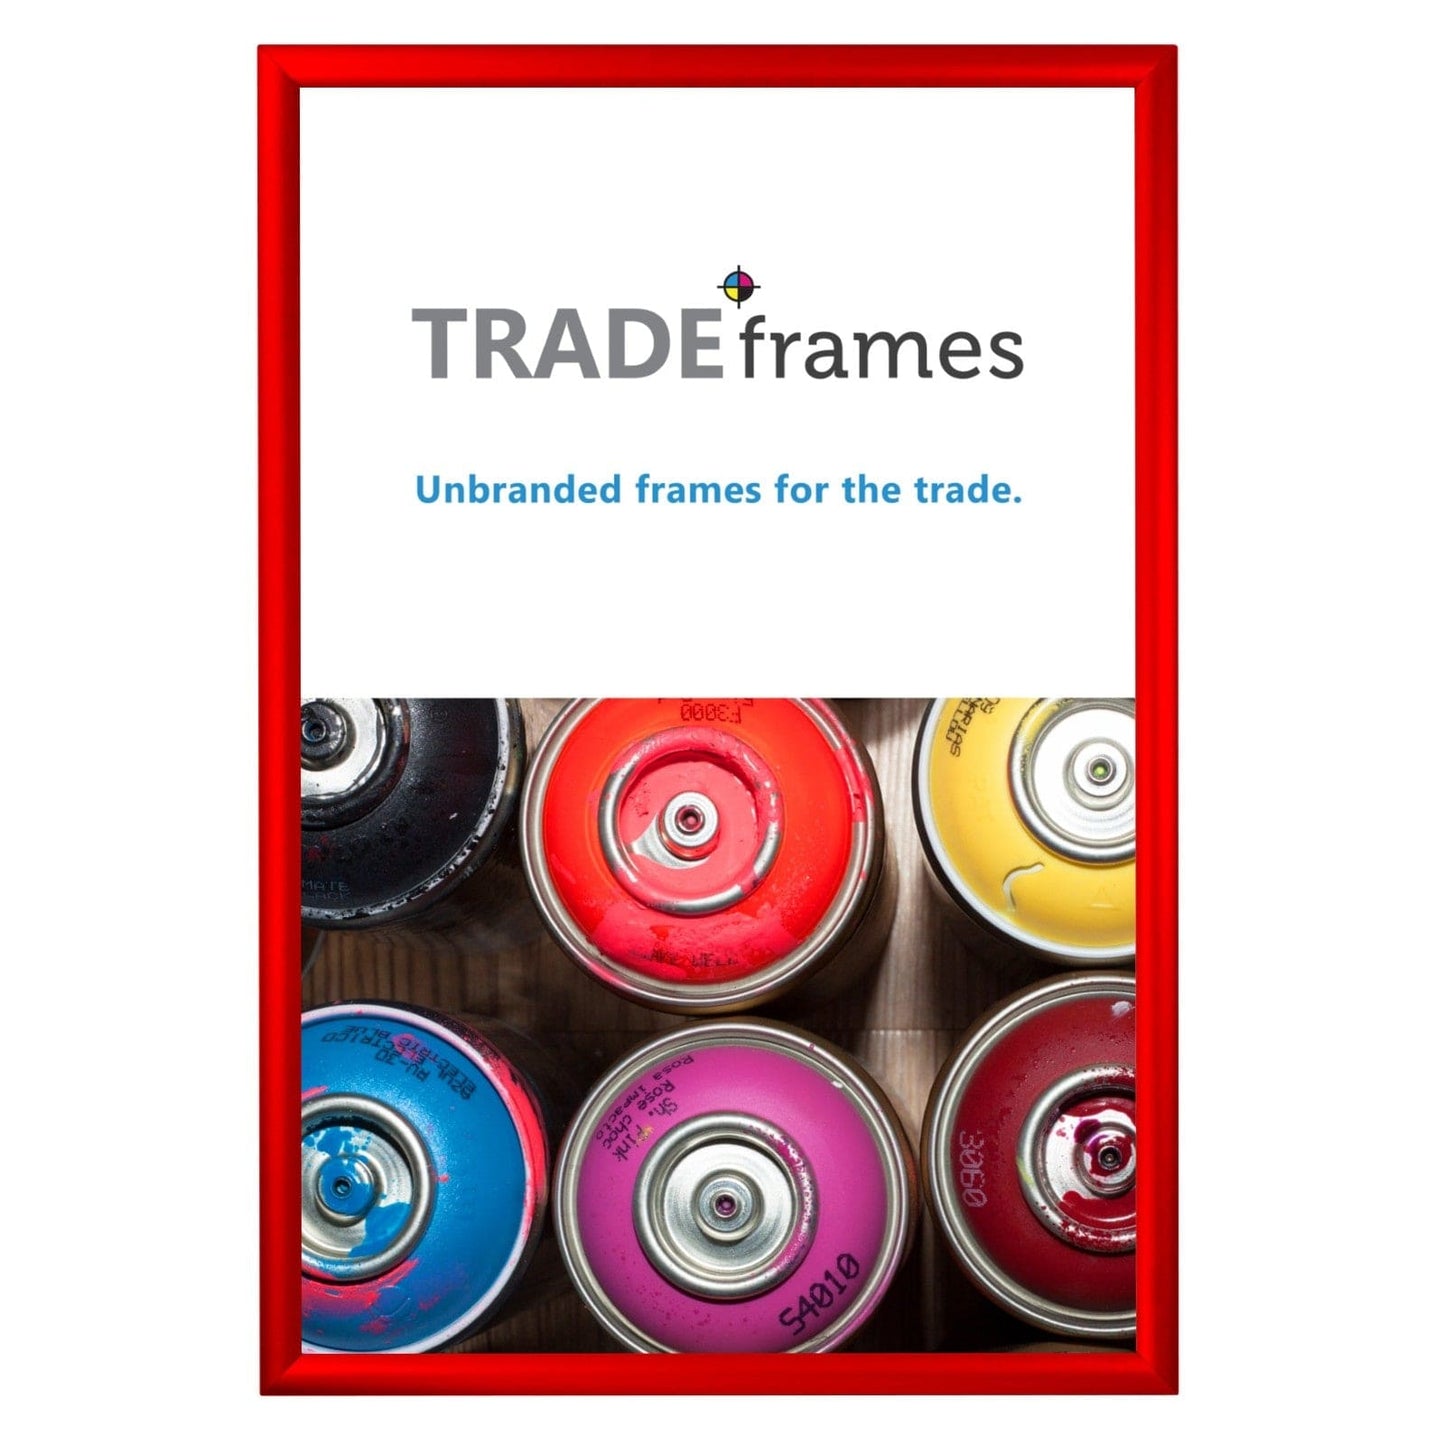 22x34  TRADEframe Red Snap Frame 22x34 - 1.2 inch profile - Snap Frames Direct